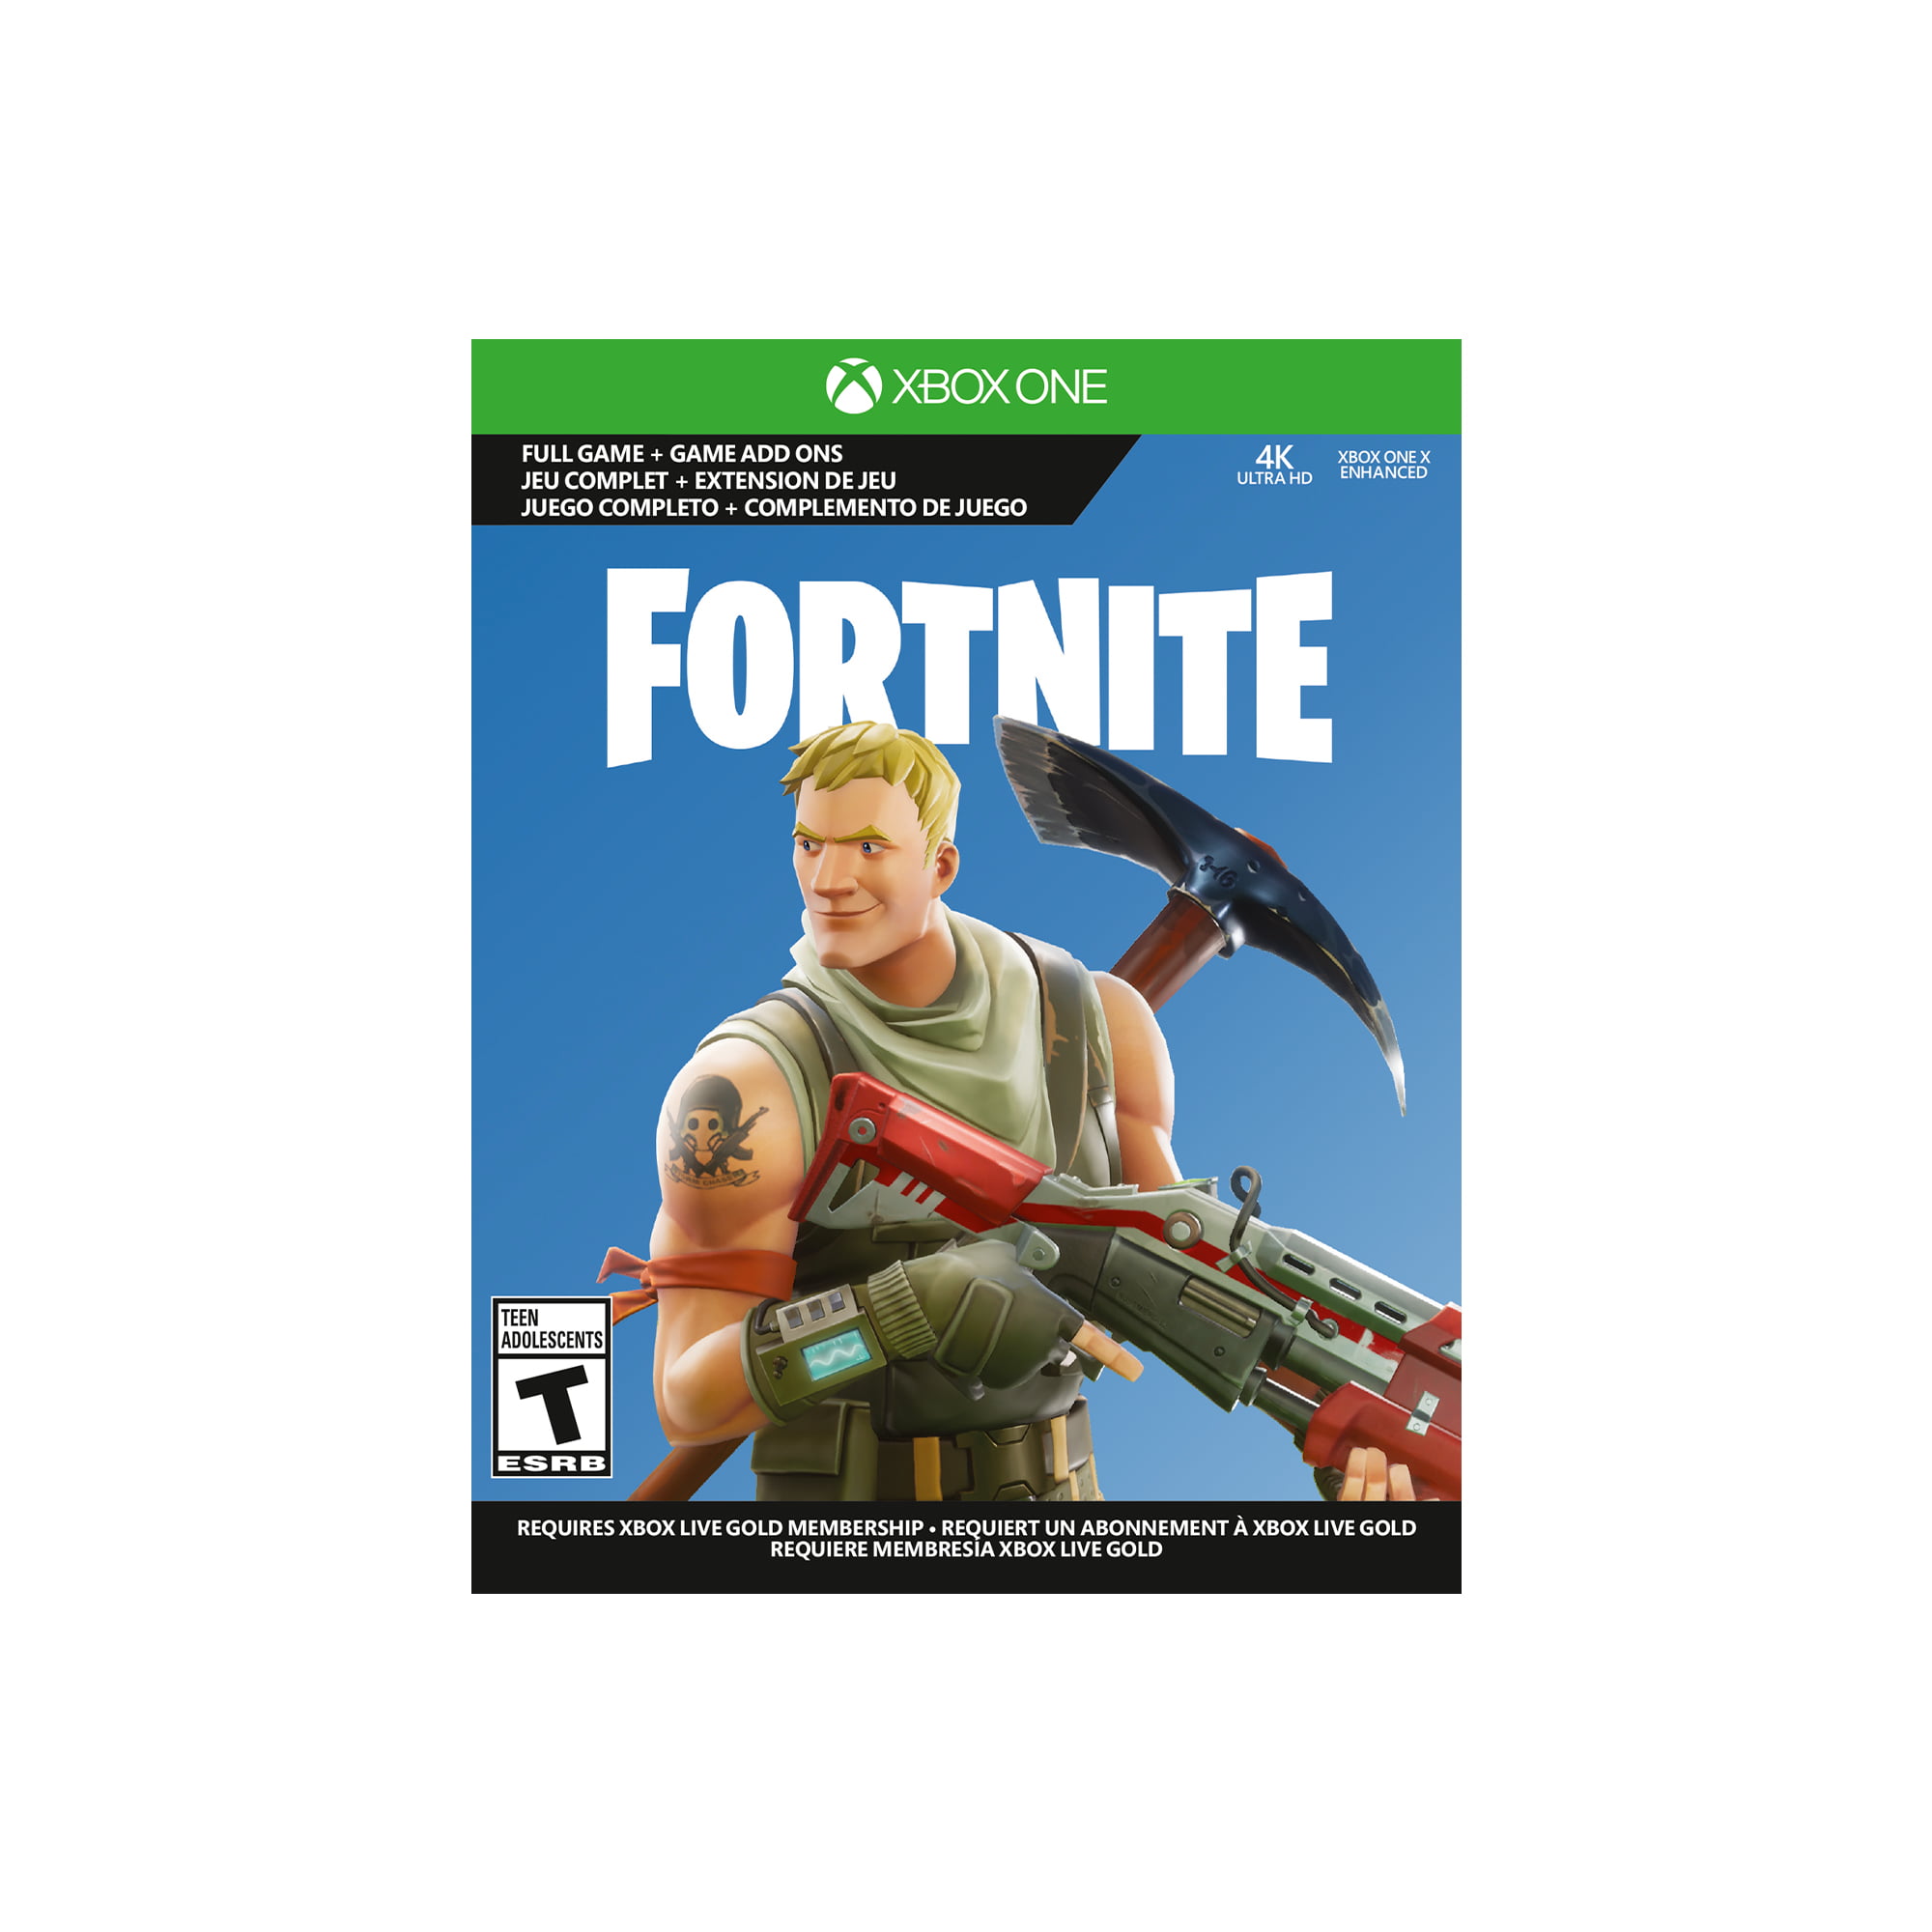 Microsoft Xbox One S 1TB Gaming Console Fortnite Battle Royale Edition with  Wireless Controller Manufacturer Refurbished